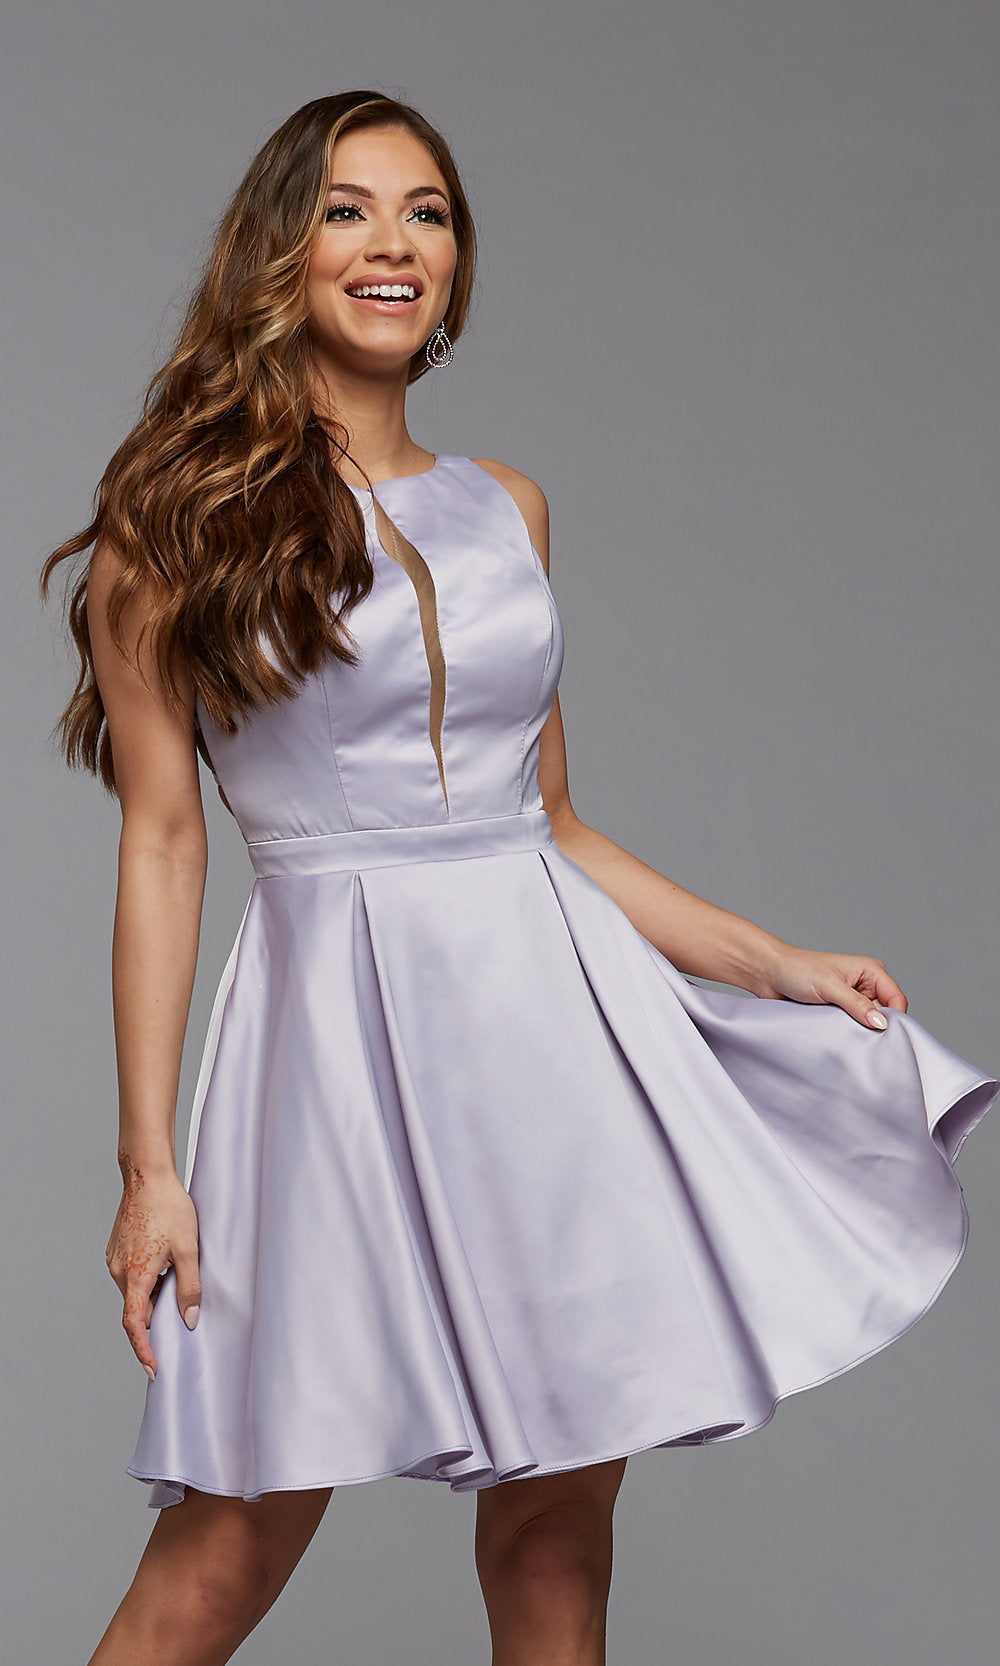 Wisteria Short Satin Homecoming Dress with Strappy Back